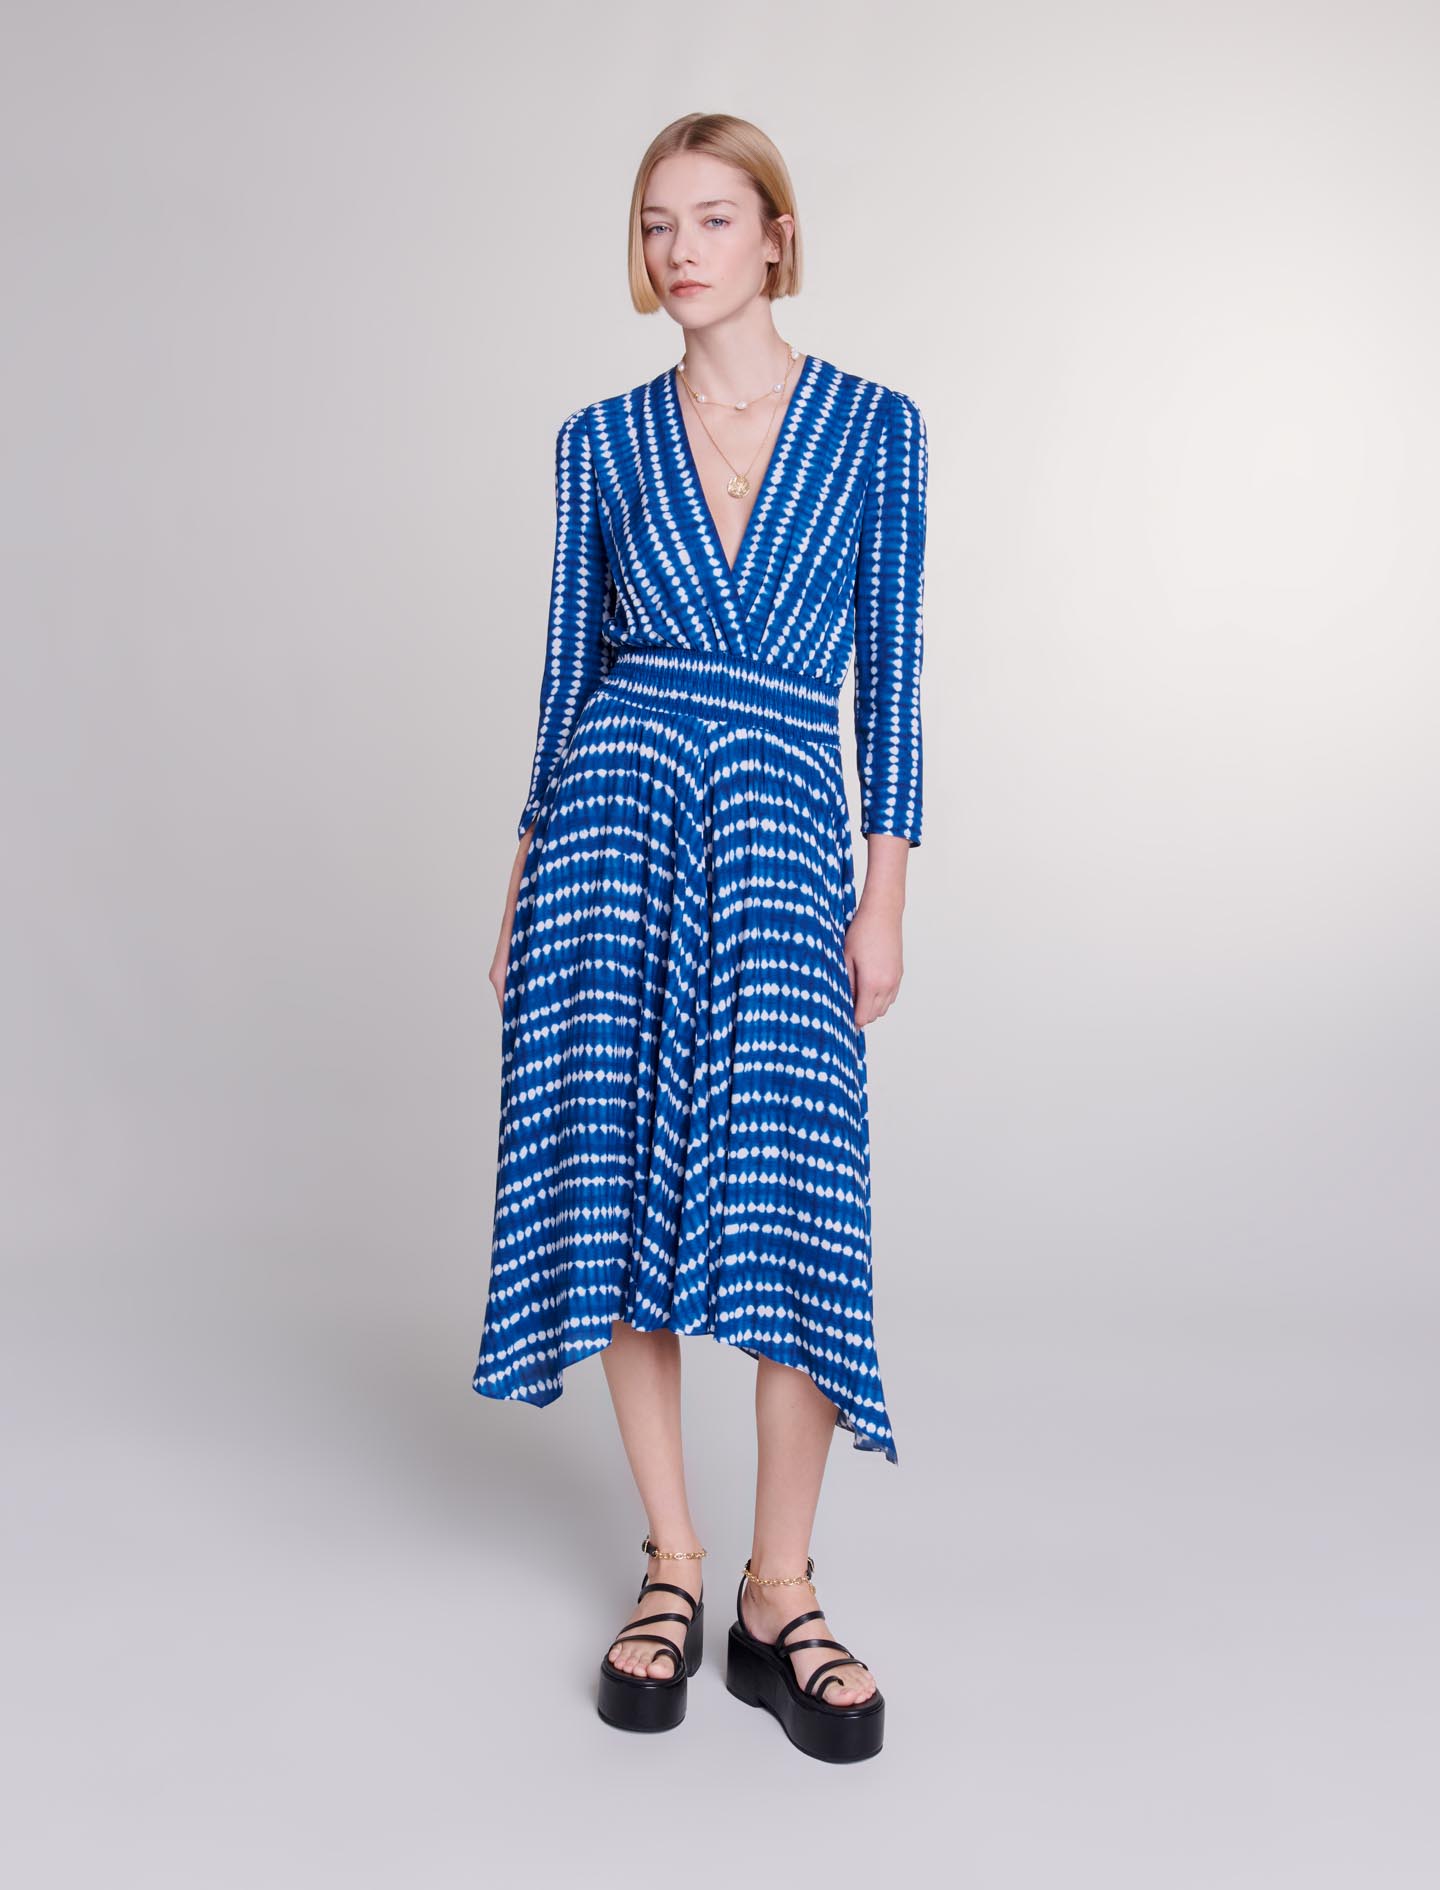 Maje Woman's viscose Asymmetrical maxi dress for Spring/Summer, in color tie dye blue drop print /